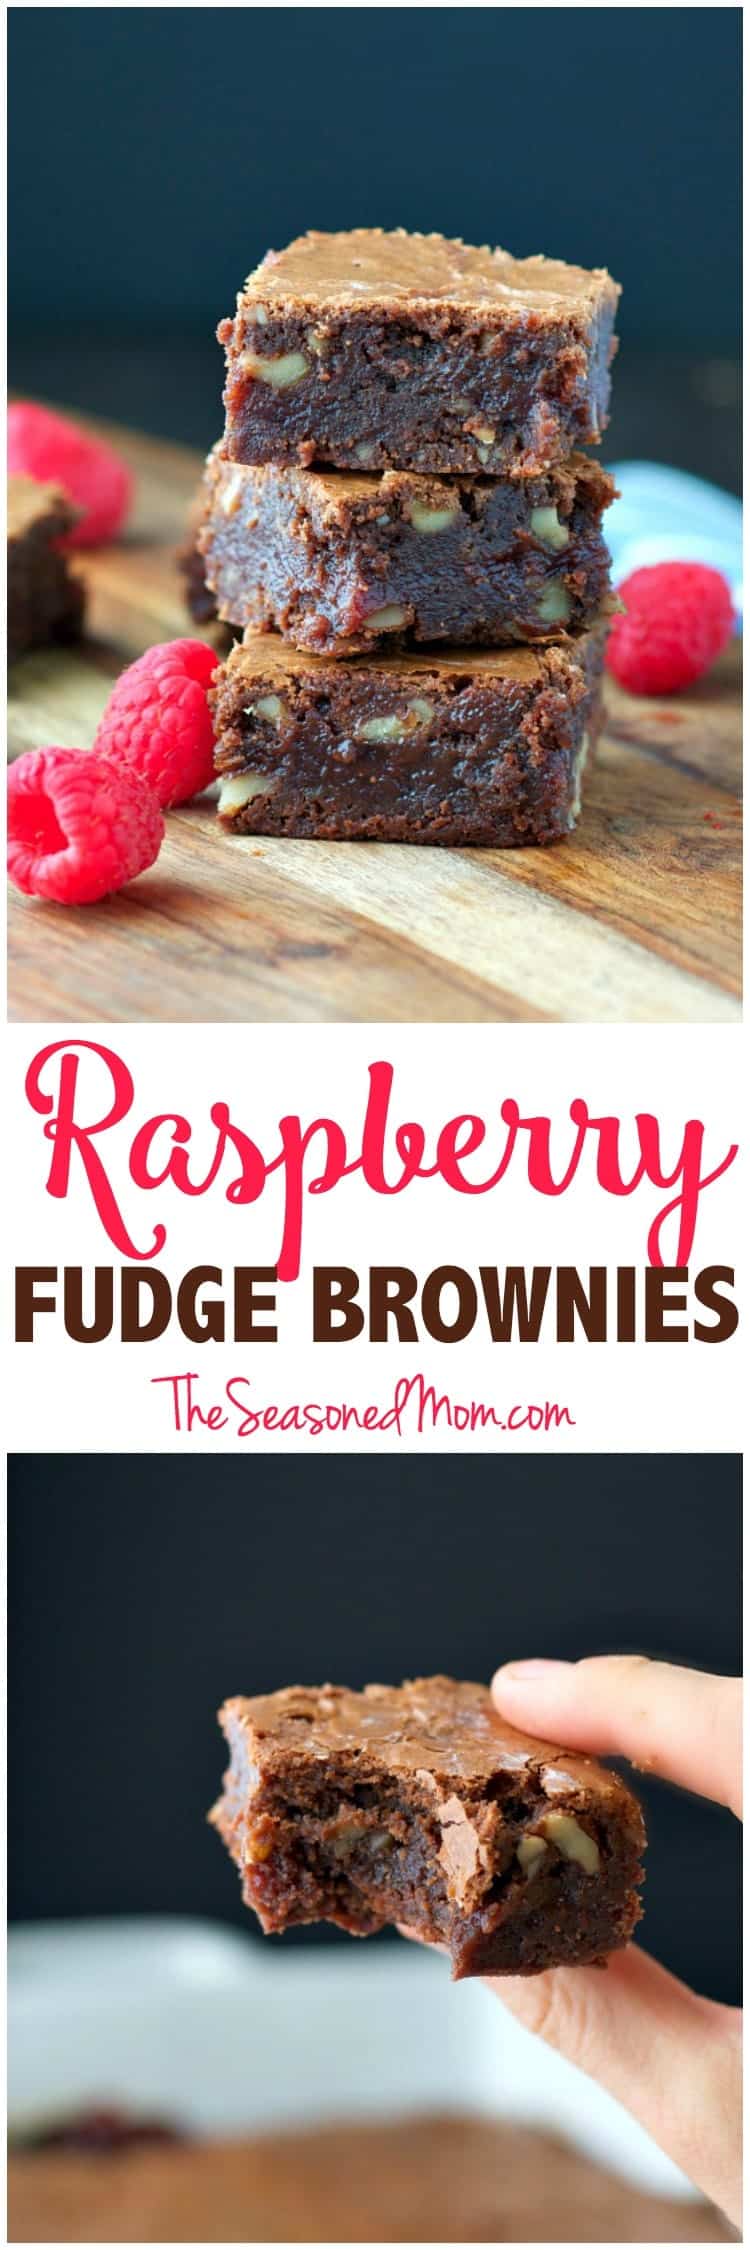 These made-from-scratch Raspberry Fudge Brownies are rich, chocolatey, and studded with crunchy walnuts. A center layer of raspberry preserves gives the dessert bars a moist, sweet, and juicy filling that is irresistible! 